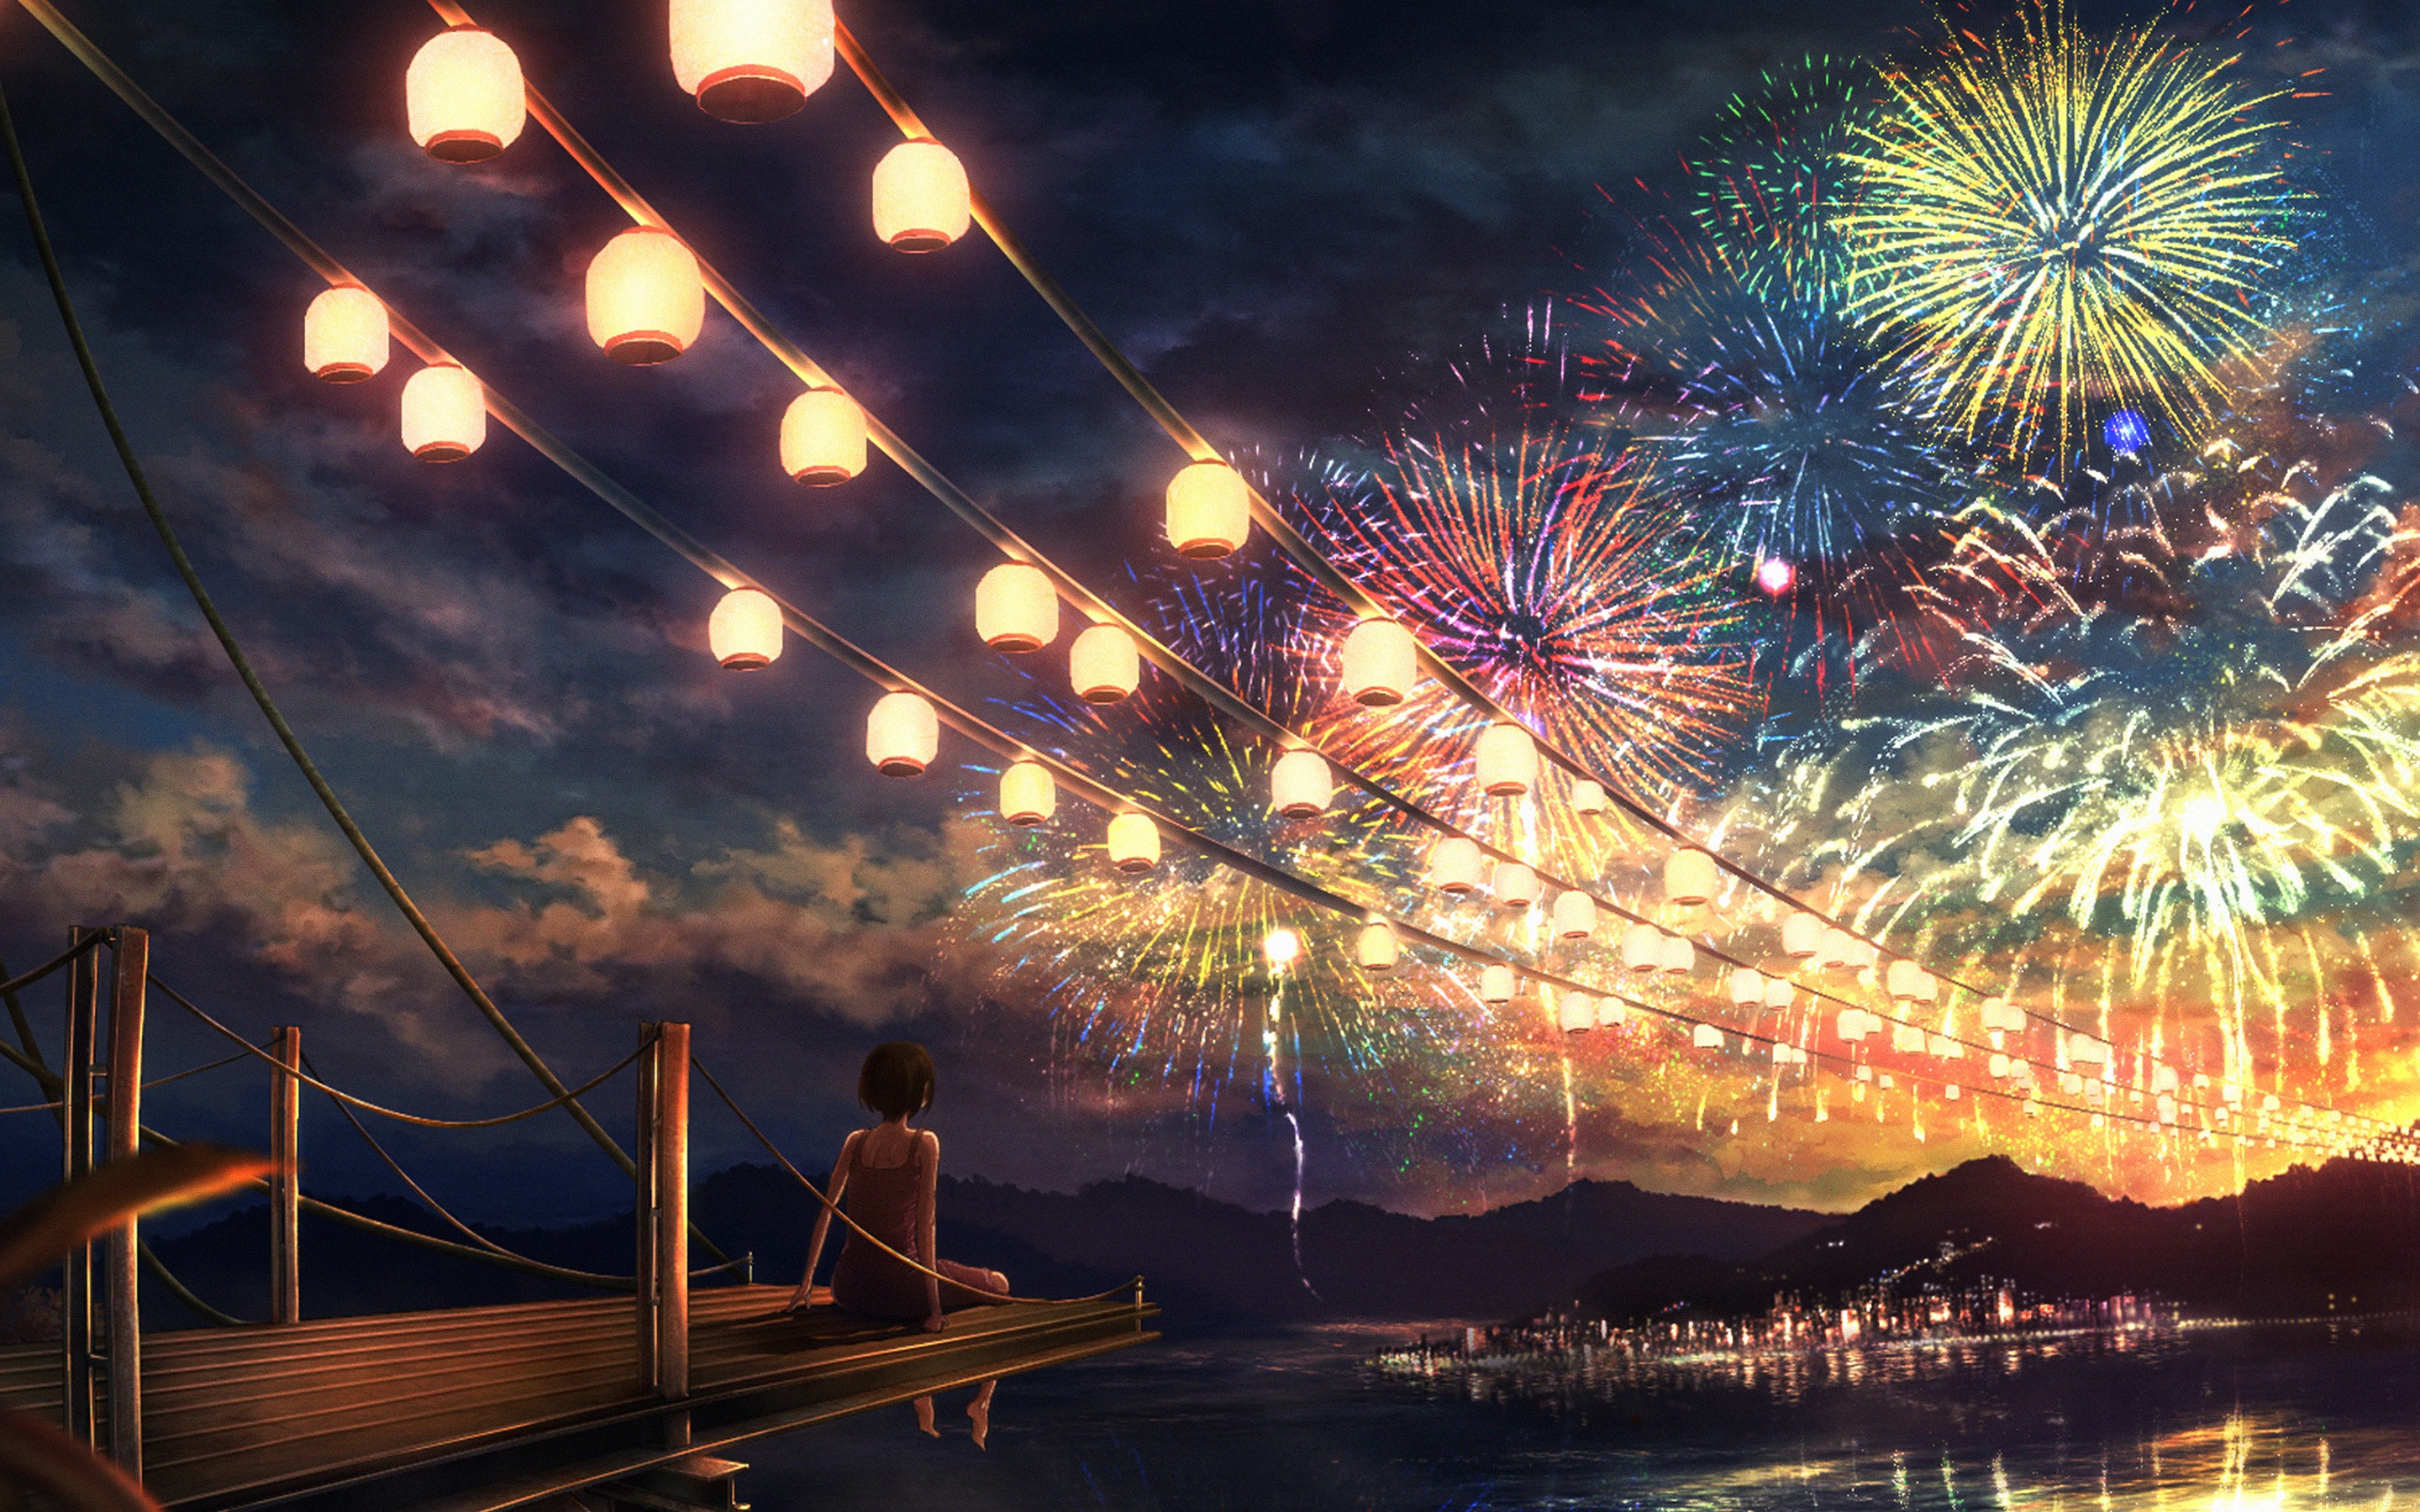 Anime 2880x1800 anime girls night river looking into the distance fireworks women outdoors sky sitting alone lantern night sky outdoors anime